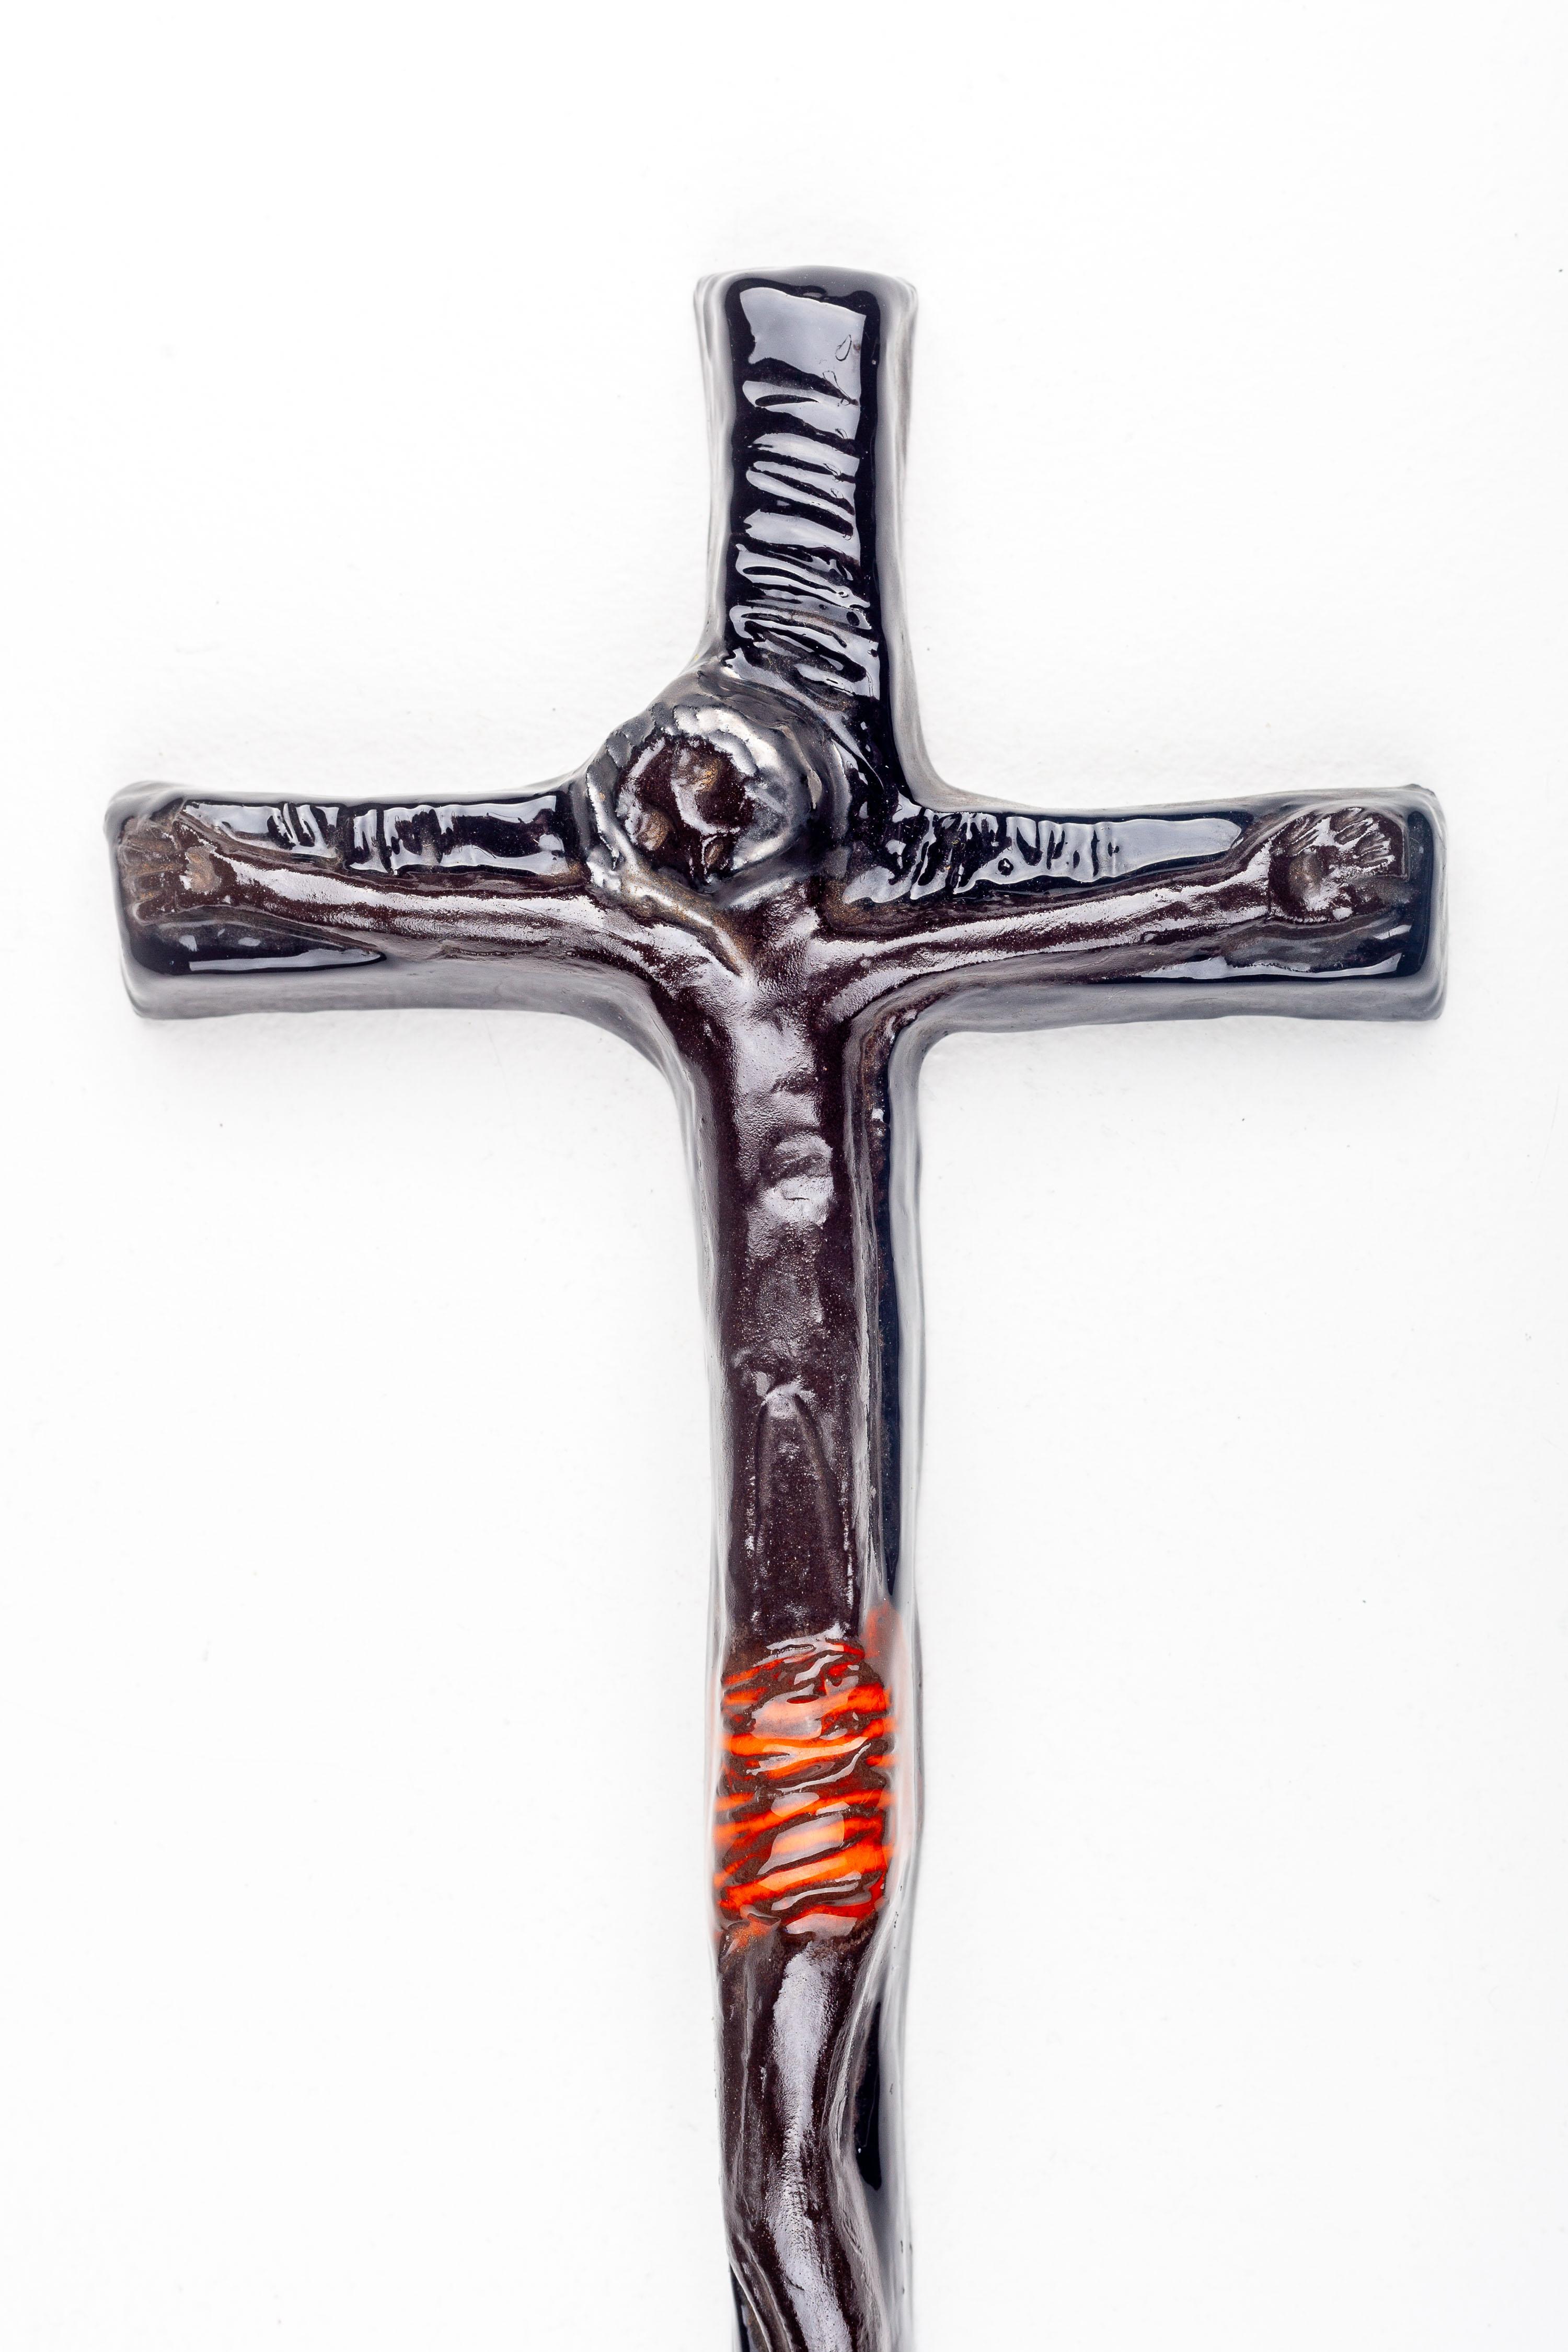 This mid-century modern wall crucifix exemplifies the innovative spirit of European studio art pottery from the 1950s to the 1970s. The piece is characterized by its organic, flowing lines and the contrast between the glossy, dark-toned glaze and